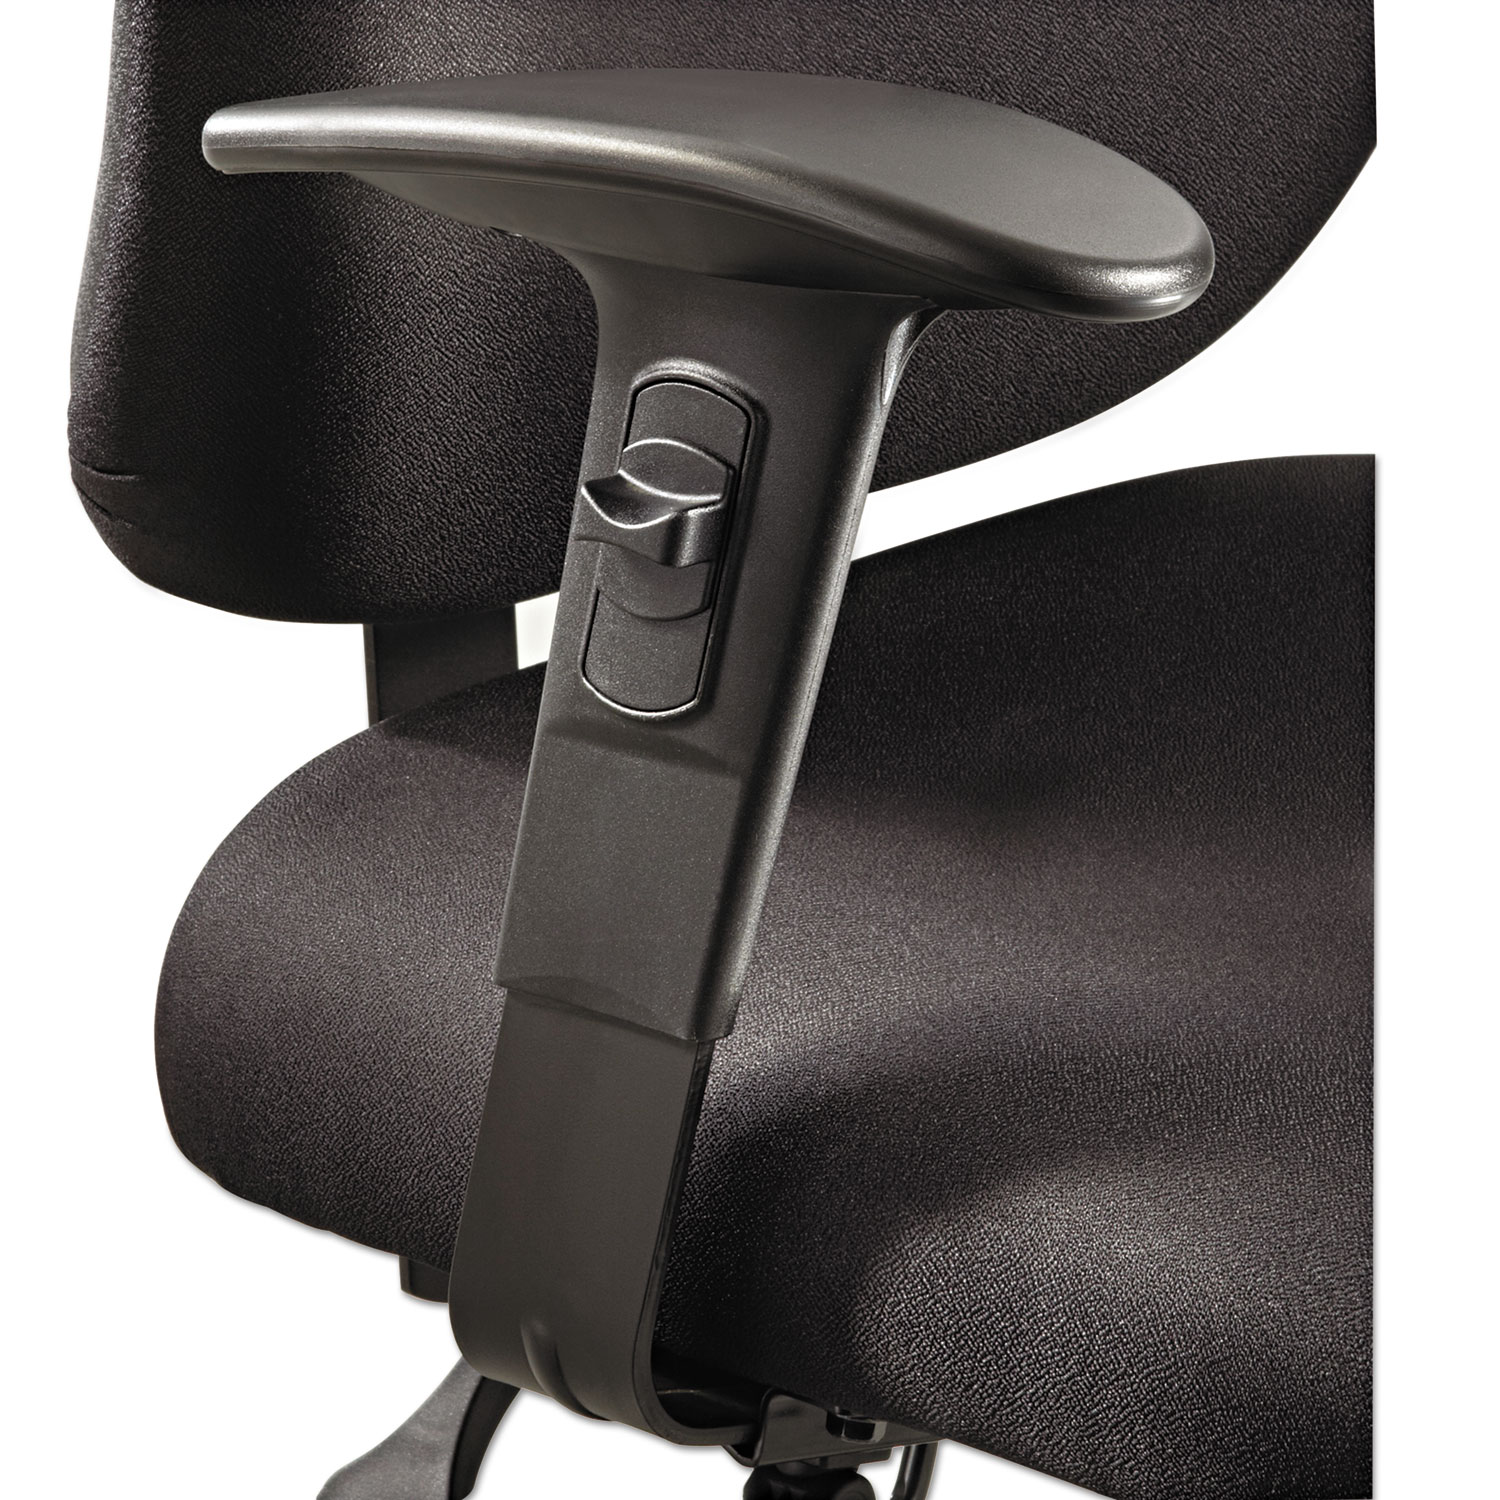  Safco 3399BL Height/Width-Adjustable T-Pad Arms for Alday 24/7 Task Chair, 3.5w x 10.5d x 14h, Black, 1 Pair (SAF3399BL) 